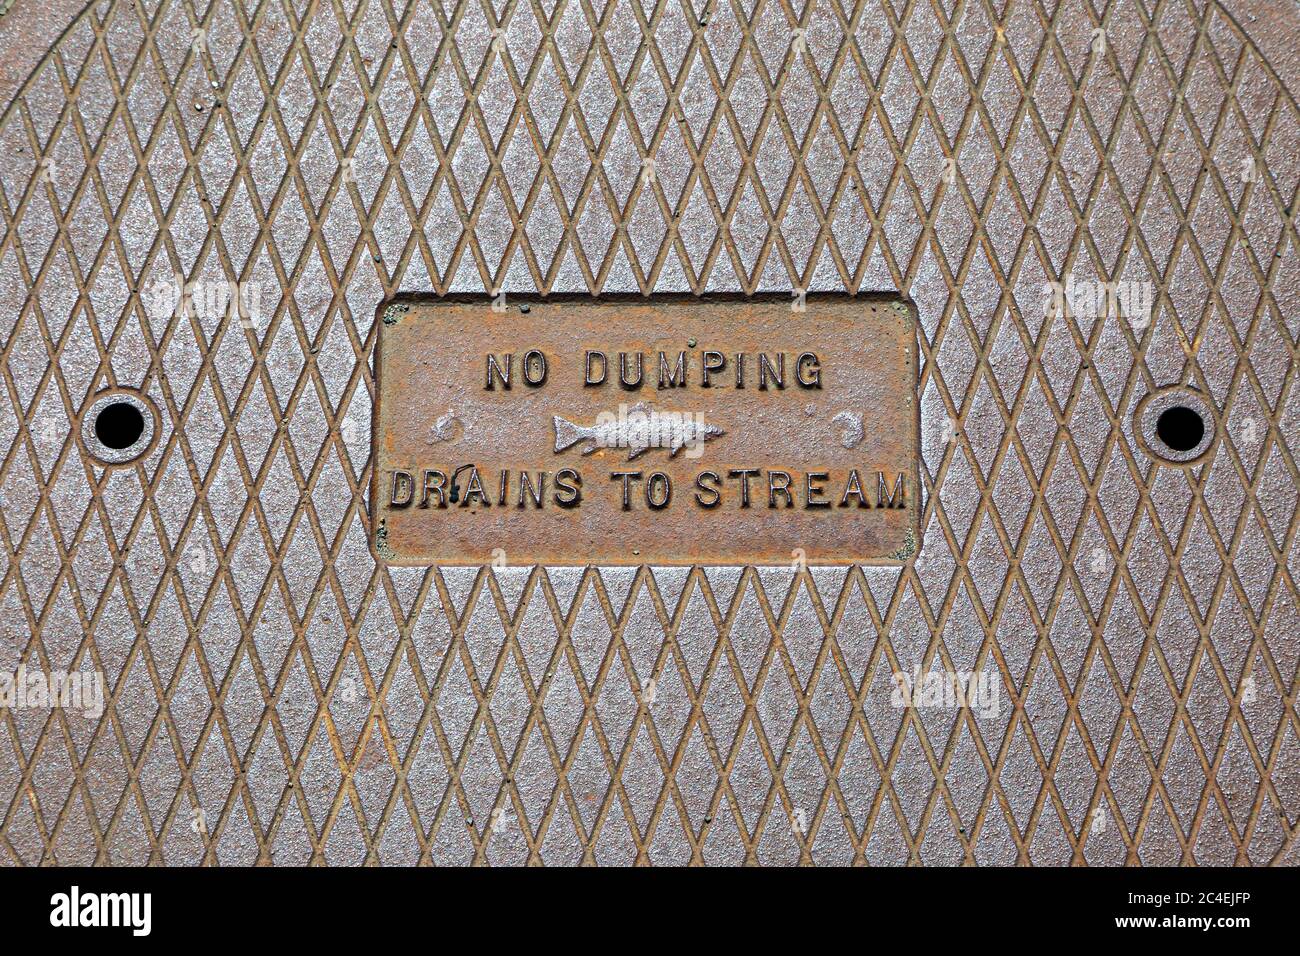 Part of a metal drain cover with a no dumping sign on it Stock Photo